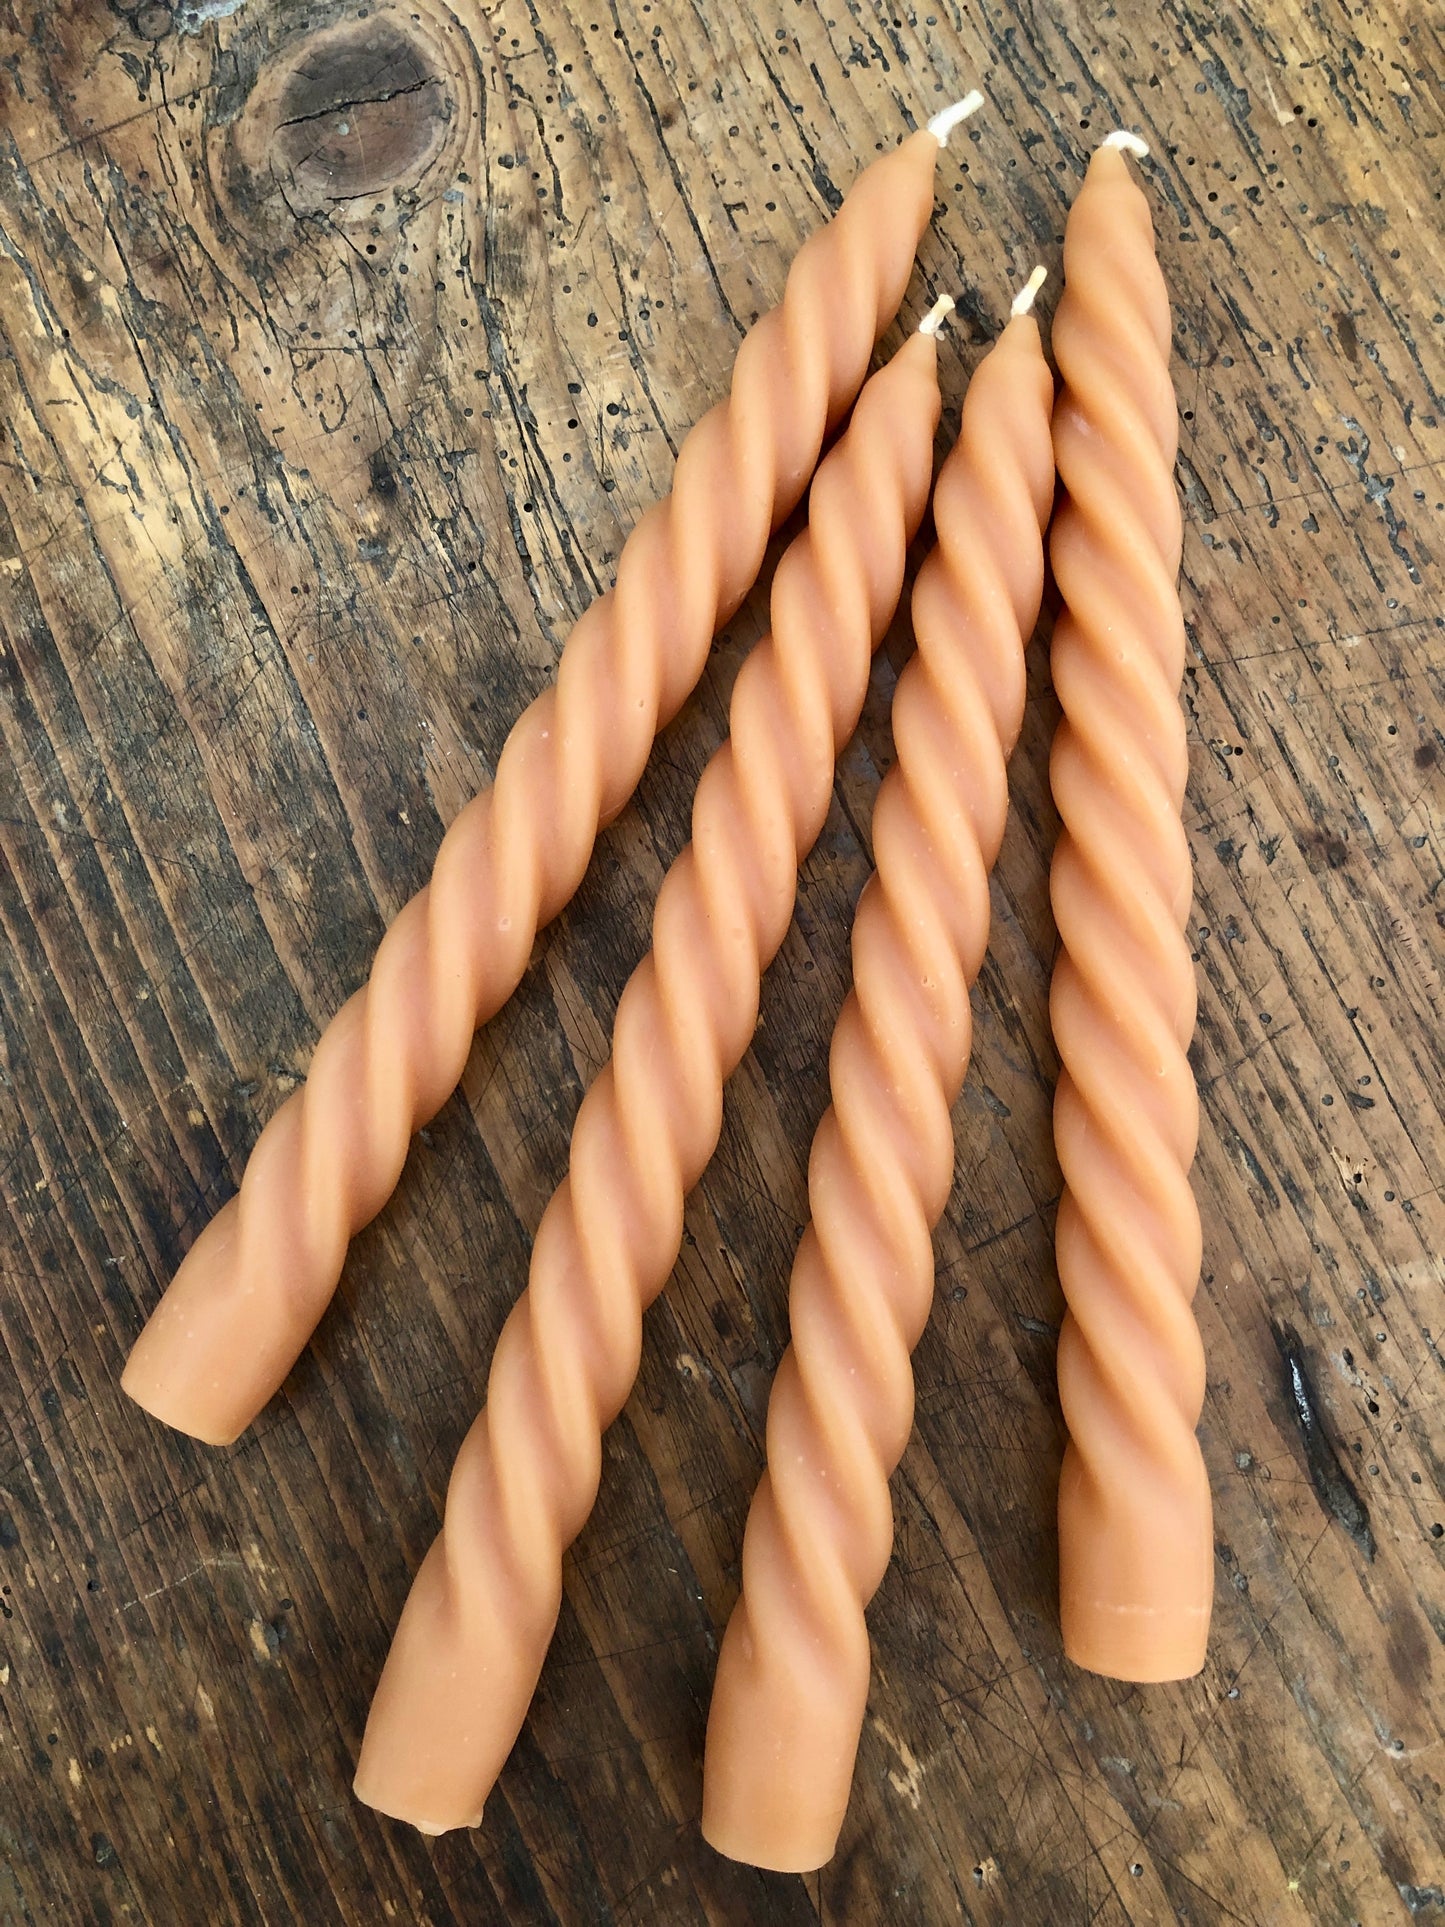 Taper candles, twisted, beeswax